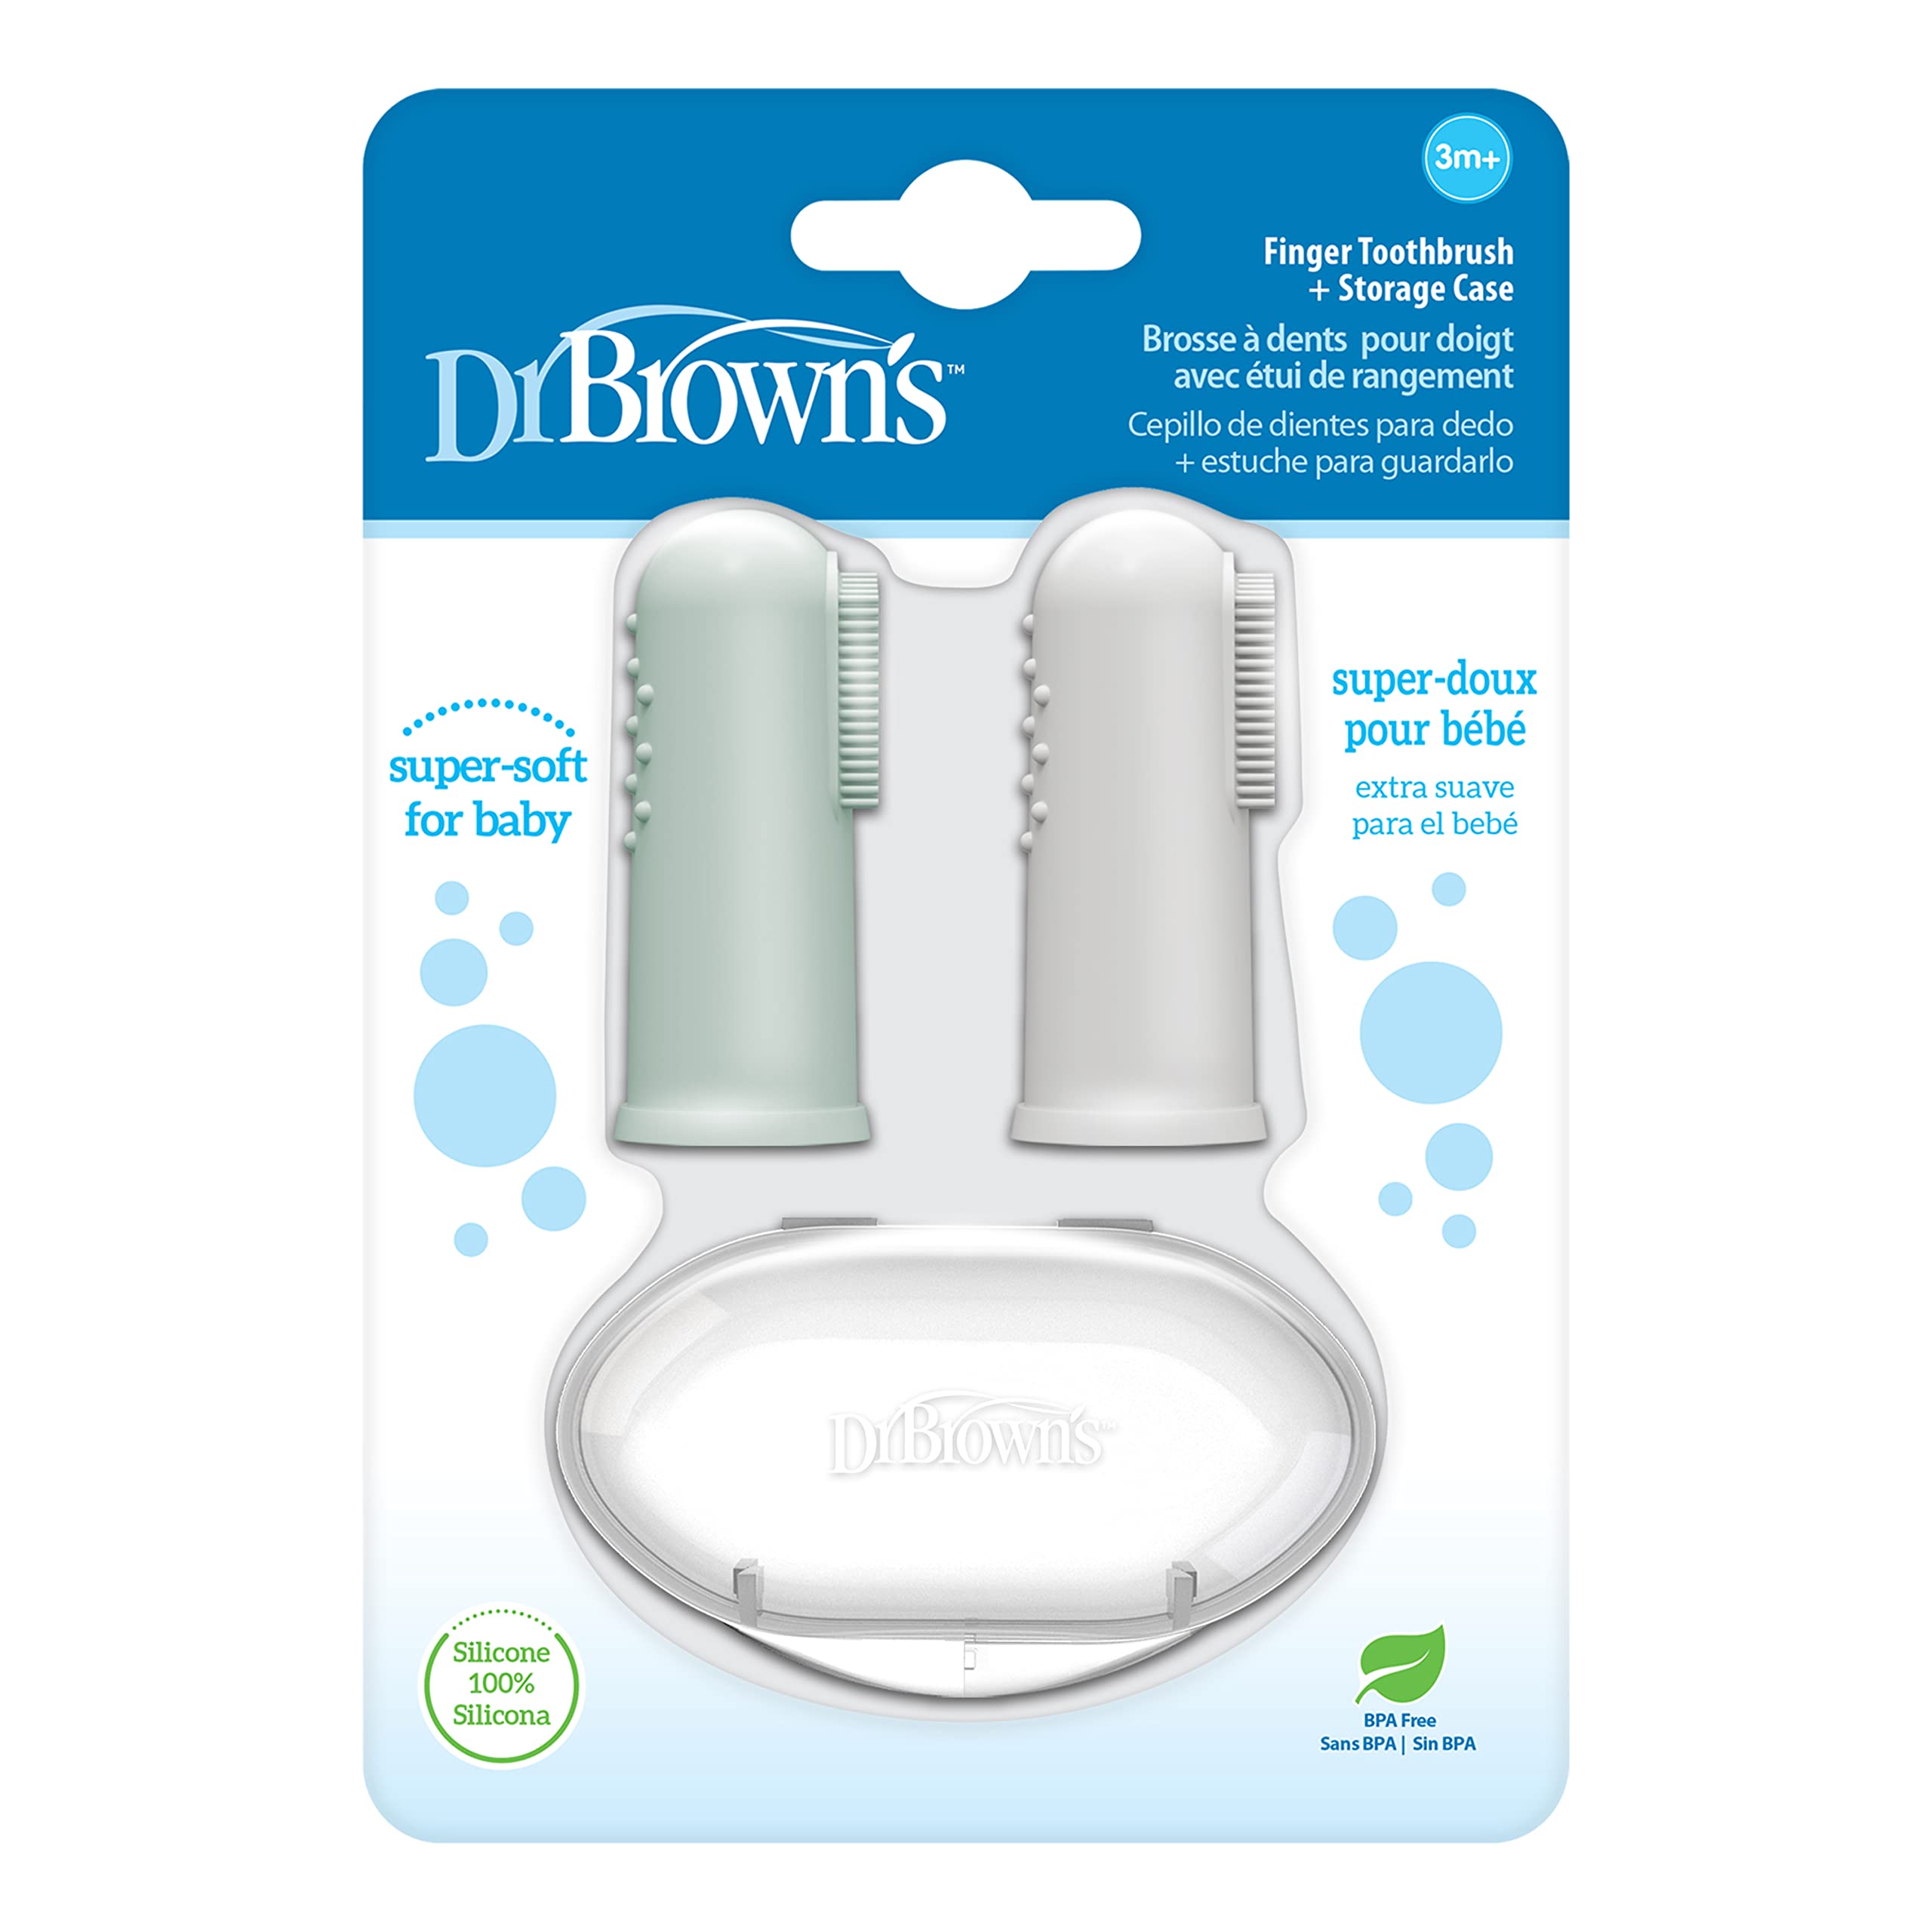 Dr. Brown's Silicone Finger Toothbrush for Baby with Travel-Storage Case, 3m+, Gray and Light Green, 2-Pack